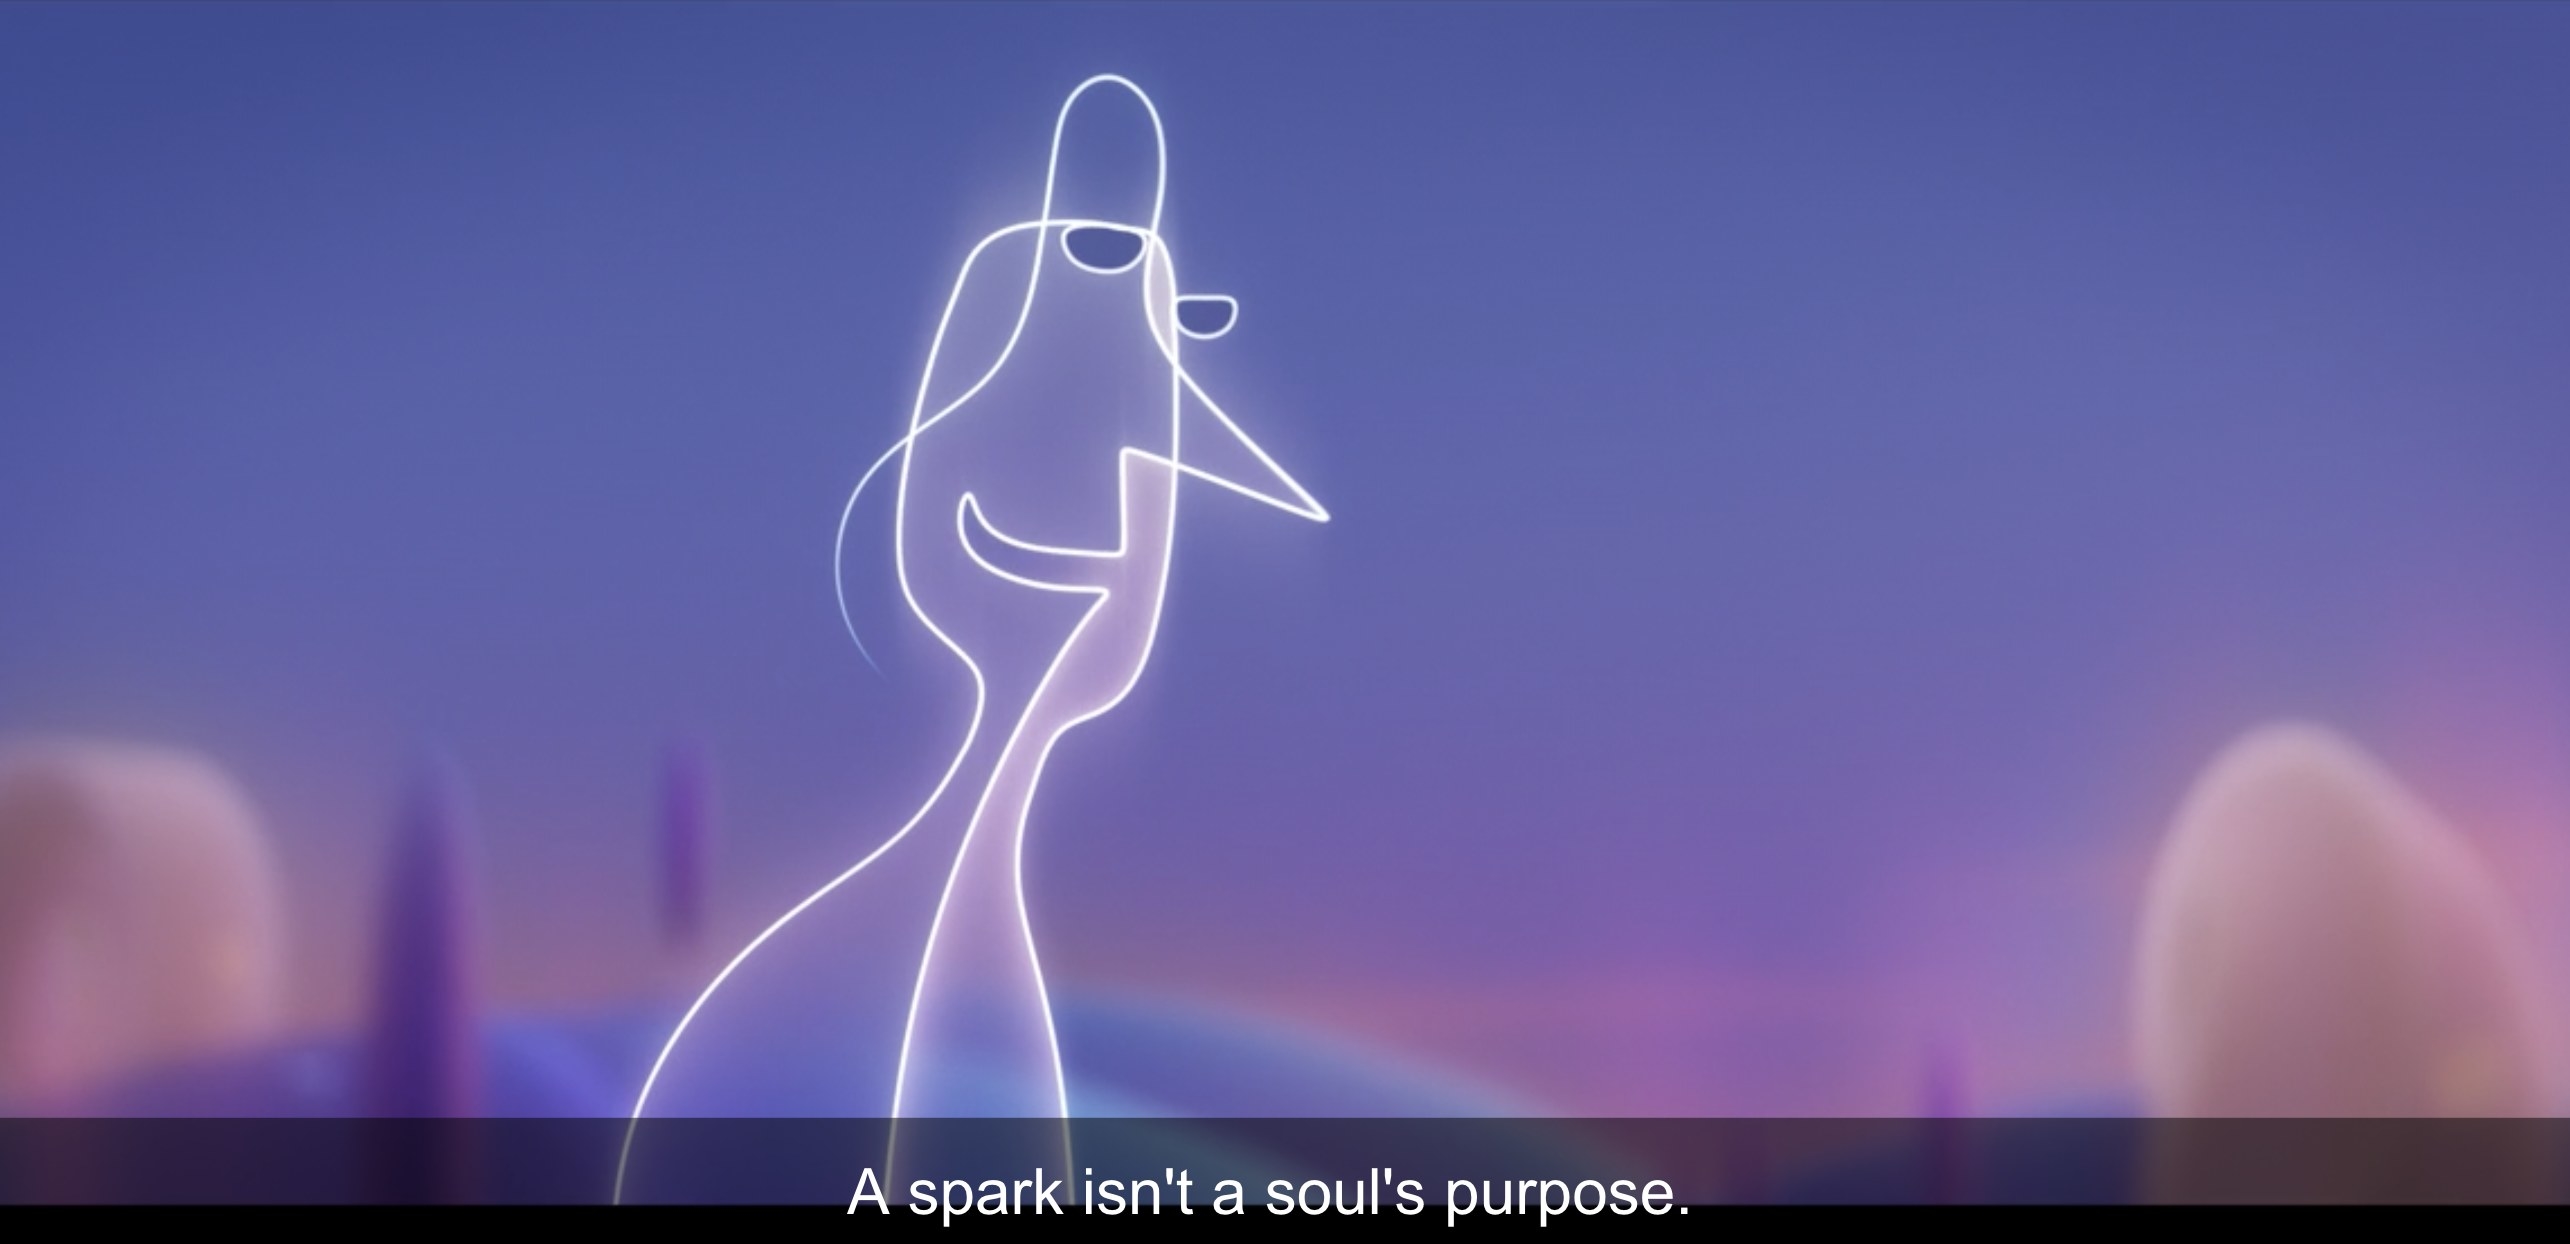 Jerry saying &quot;A spark isn&#x27;t a soul&#x27;s purpose&quot;